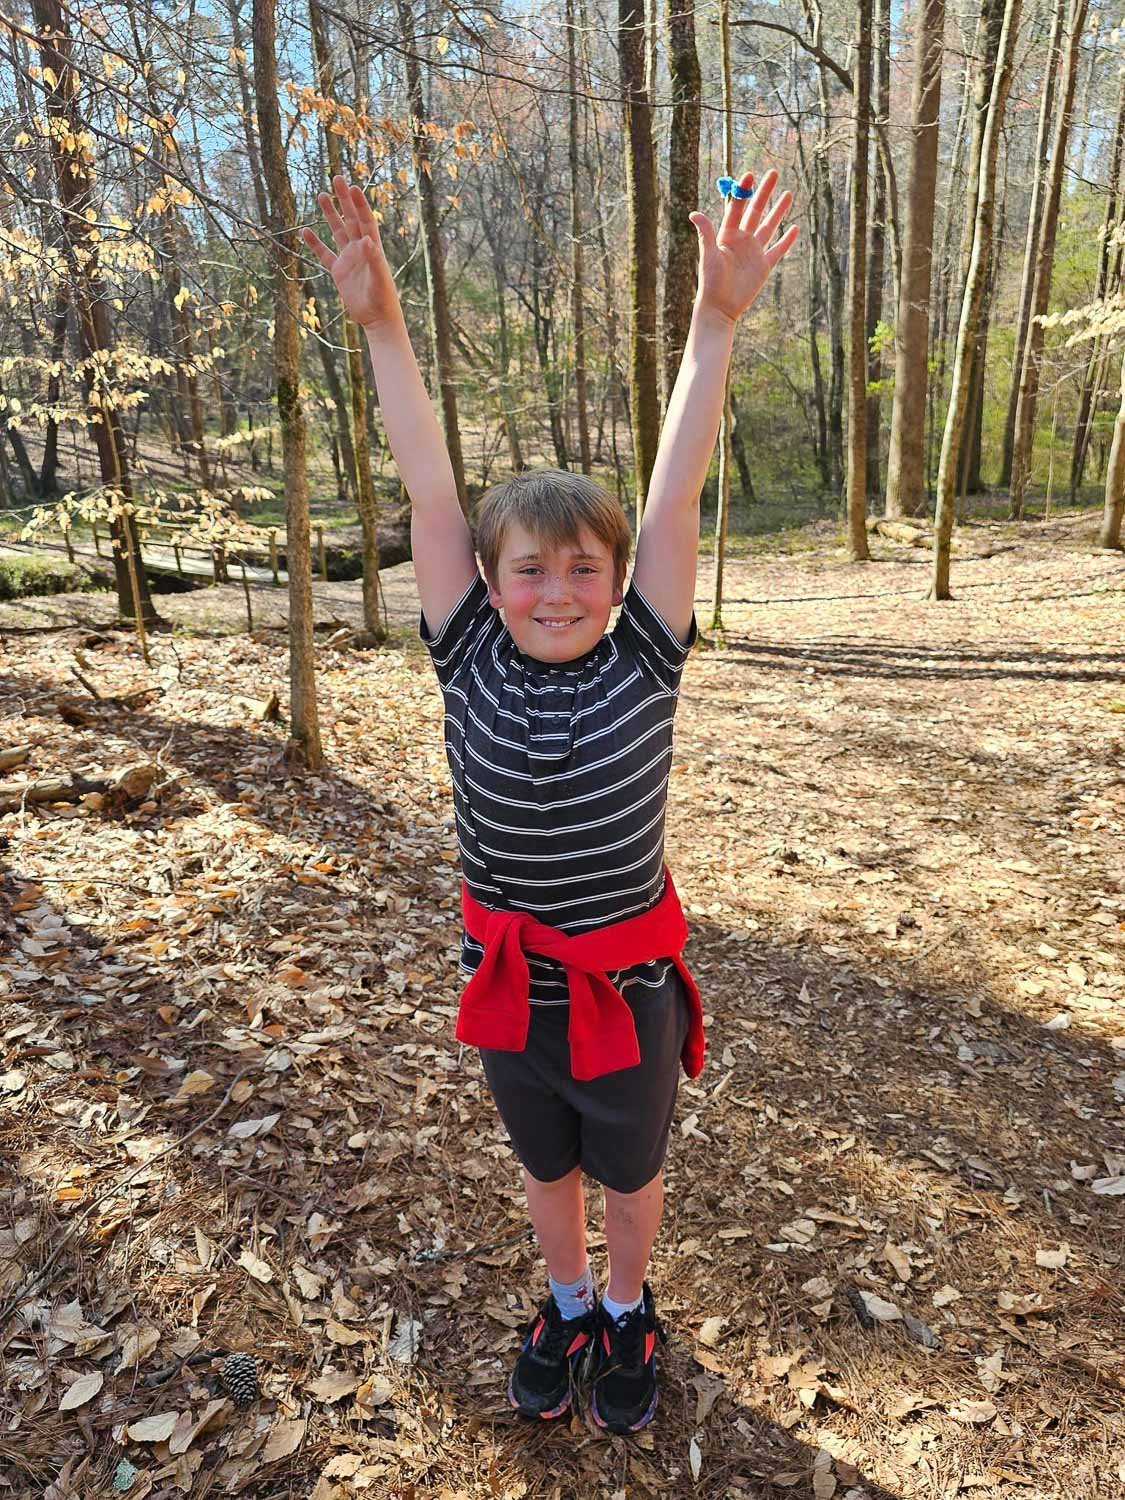 A young boy standing in a park with hands in the air